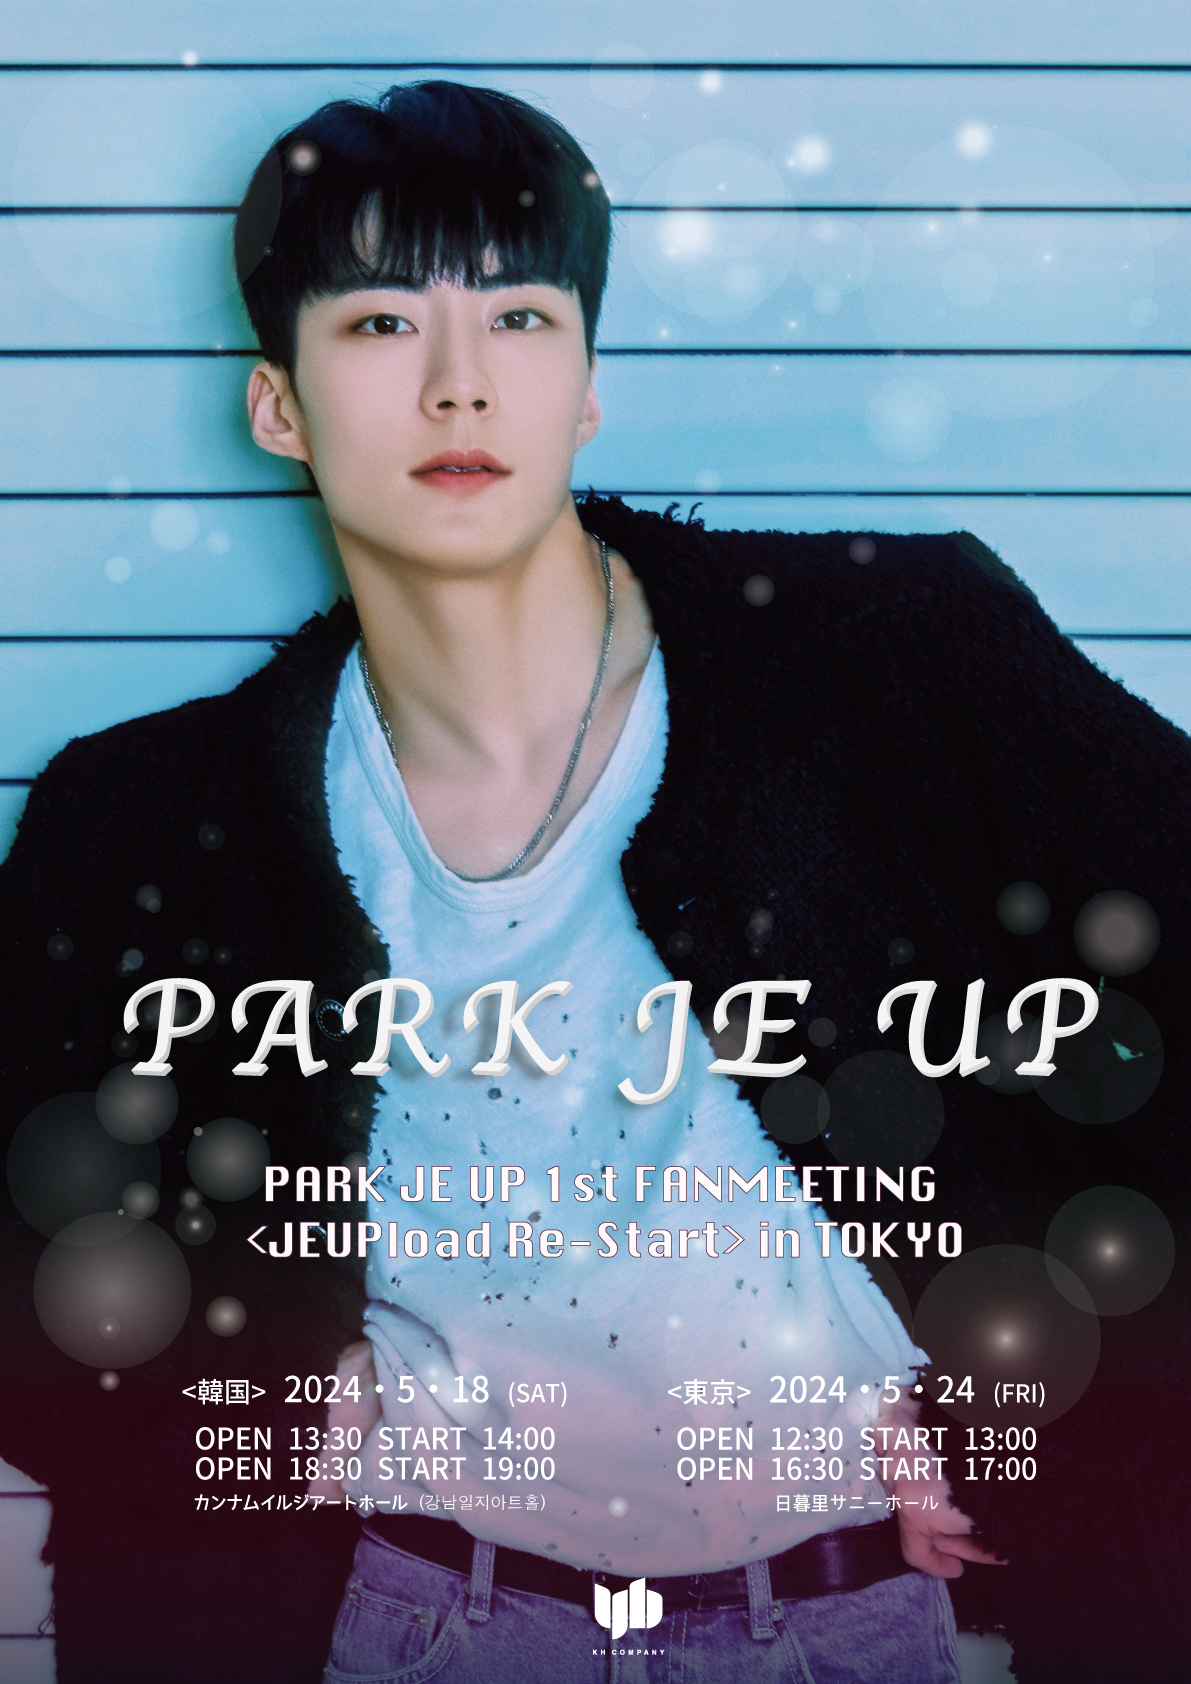 PARK JE UP 1st FANMEETING <JEUPload Re-Start> in TOKYO（東京サイン会）@北沢タウンホール